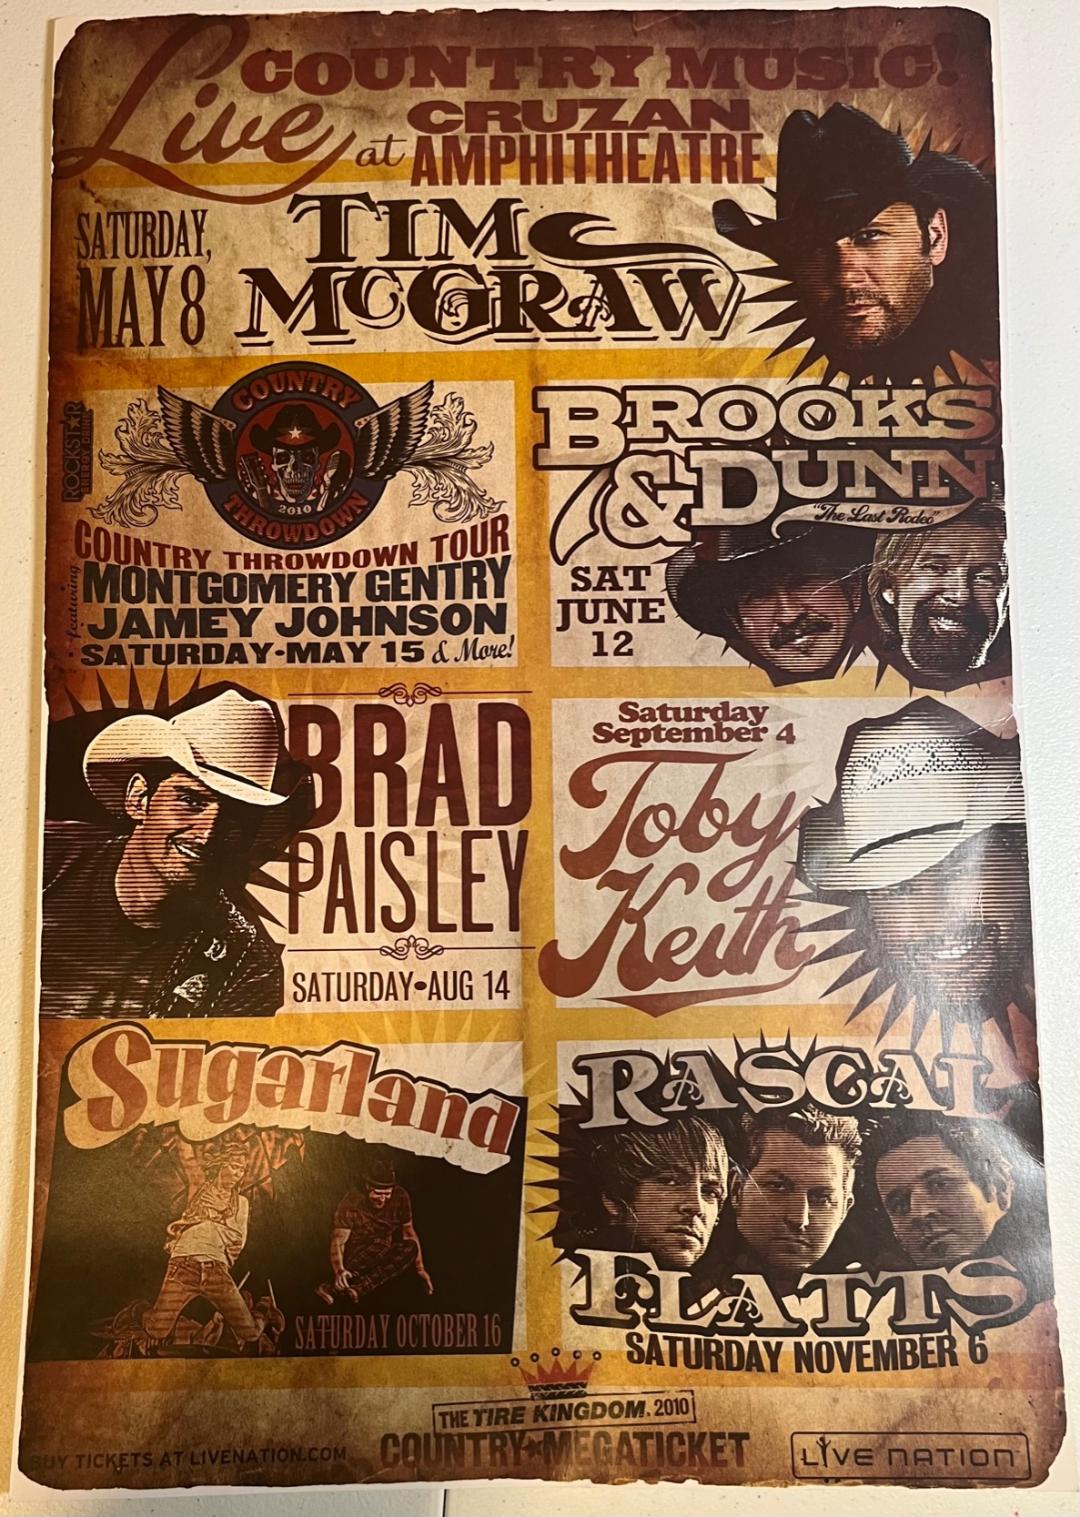 2010 Live Nations Tire Kingdom Country Megaticket Concert Poster South Florida Country Music